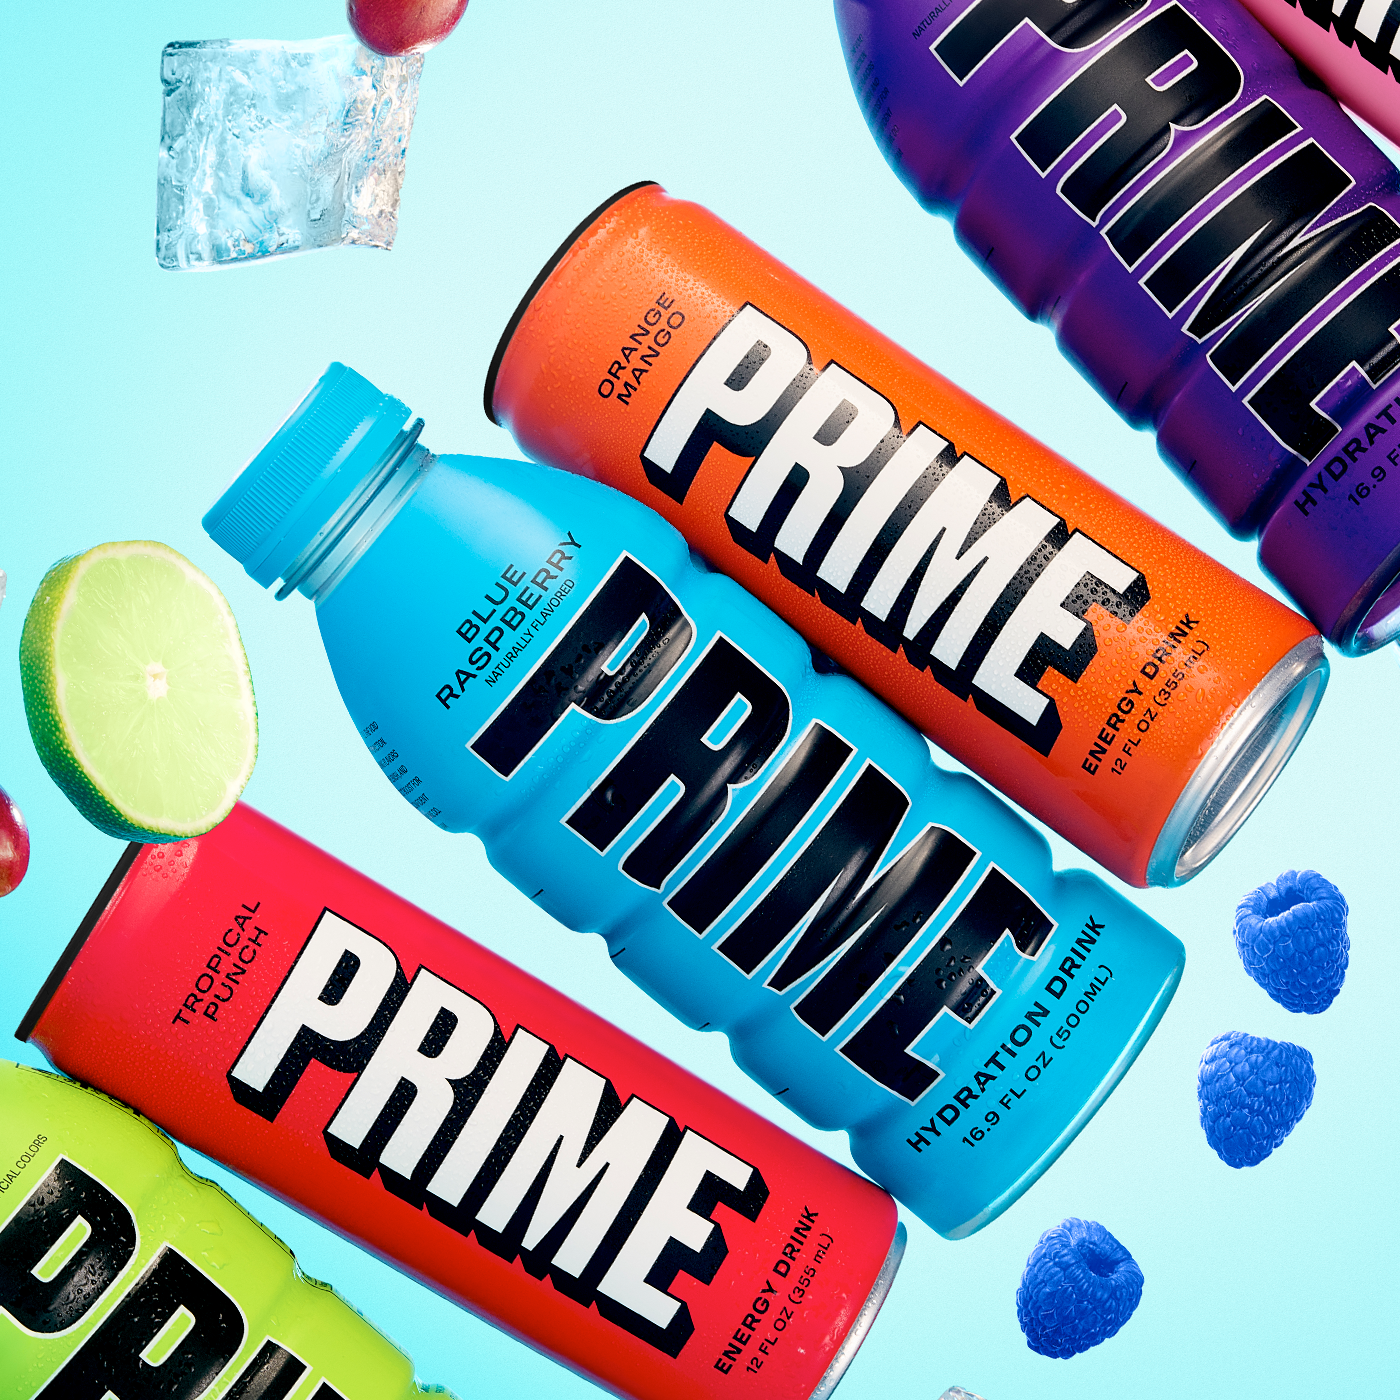 An array of Prime hydration and energy drinks in various flavors, with colorful fruits and ice suggesting the refreshing nature of the beverages.